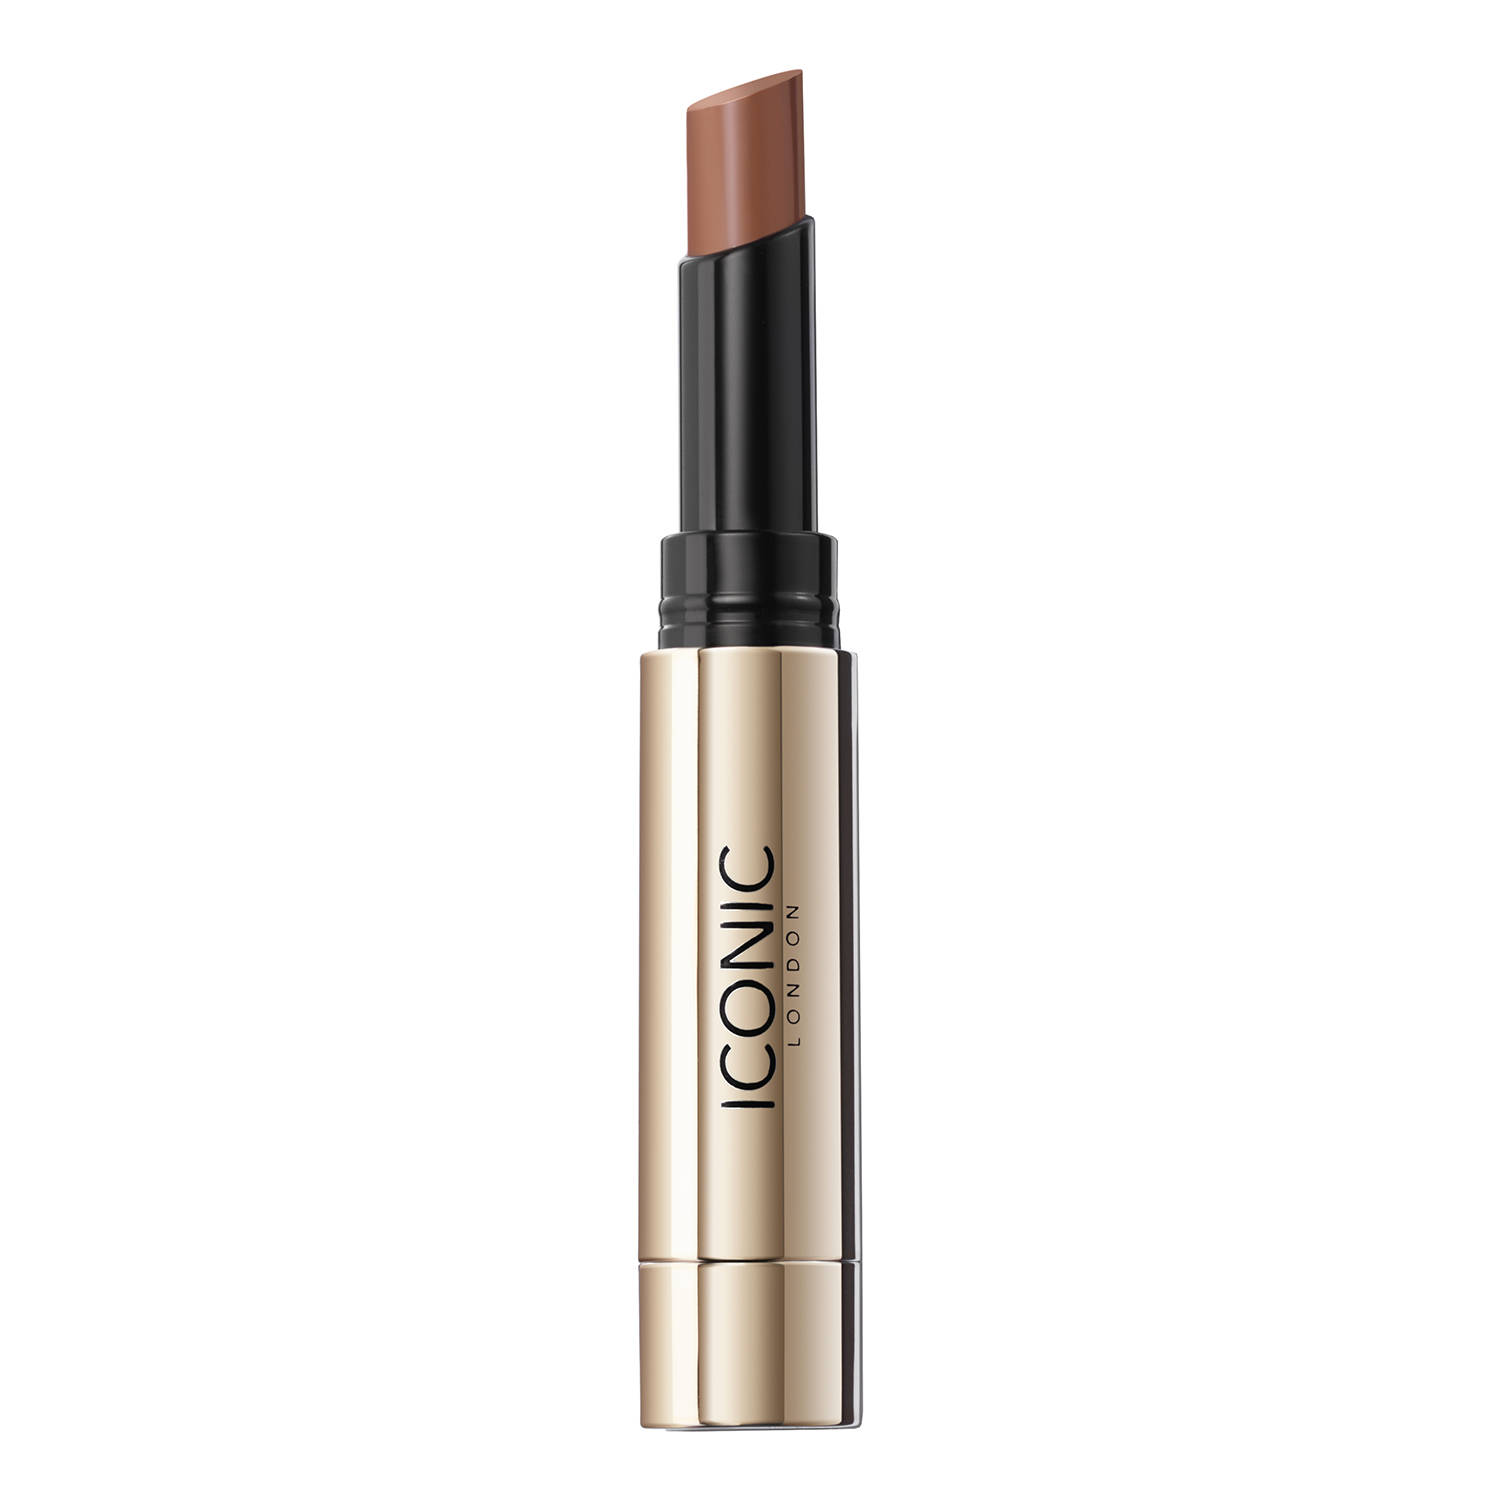 Iconic London Melting Touch Lip Balm 3Ml In The Nude